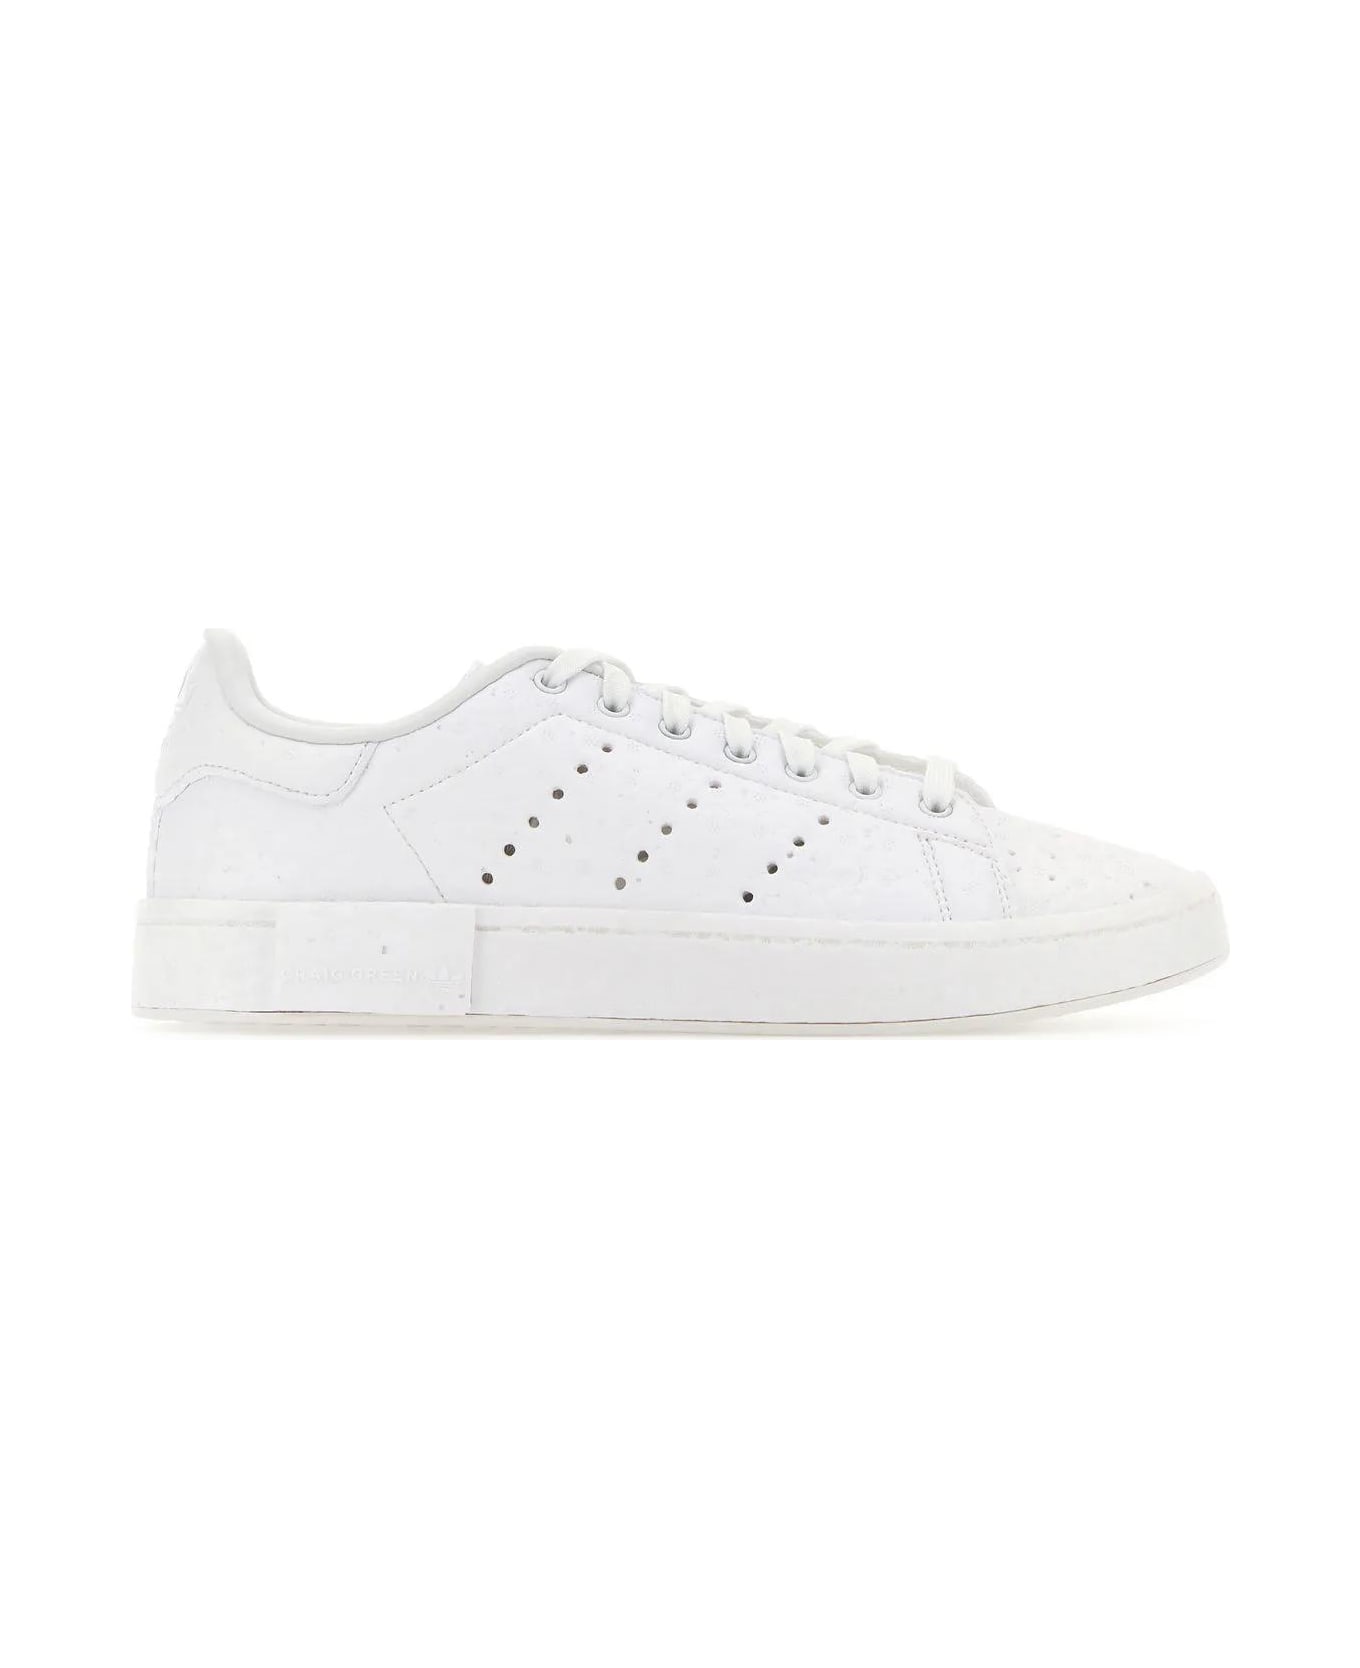 Adidas Originals by Craig Green White Fabric Craig Green Stan Smith Boost Sneakers - White